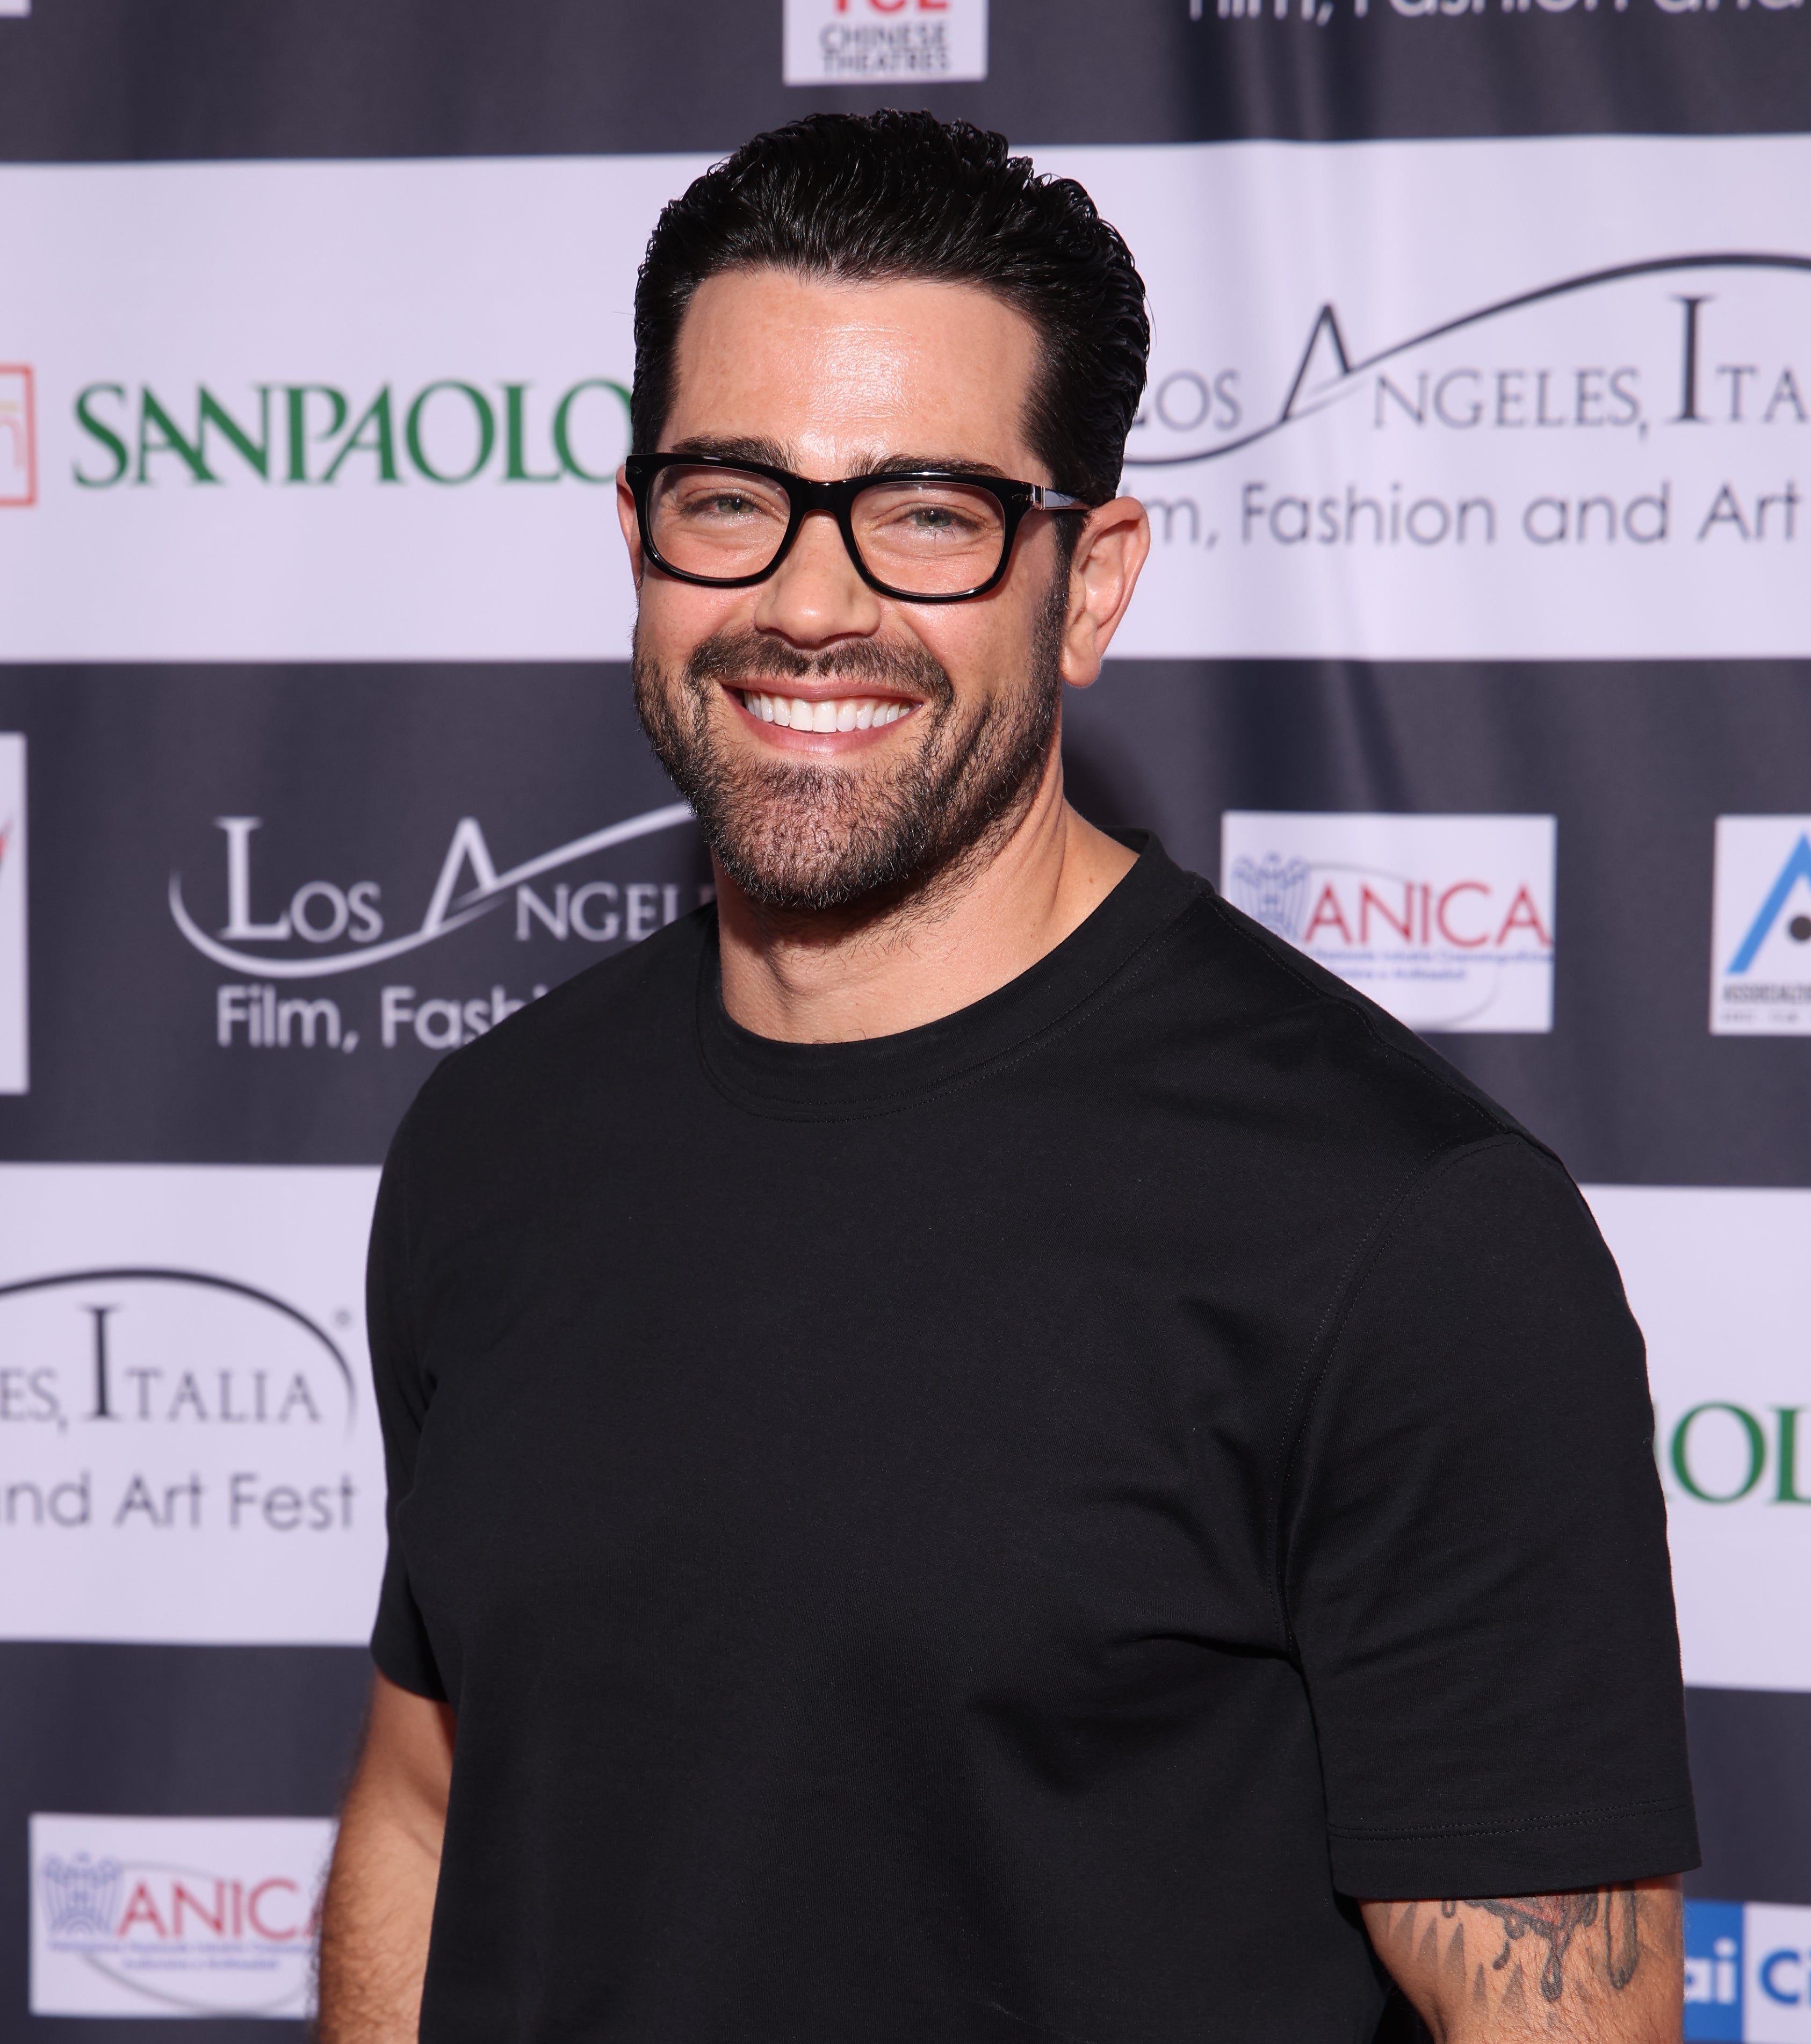 Jesse Metcalfe posing in a dark t-shirt and beige trousers at an event